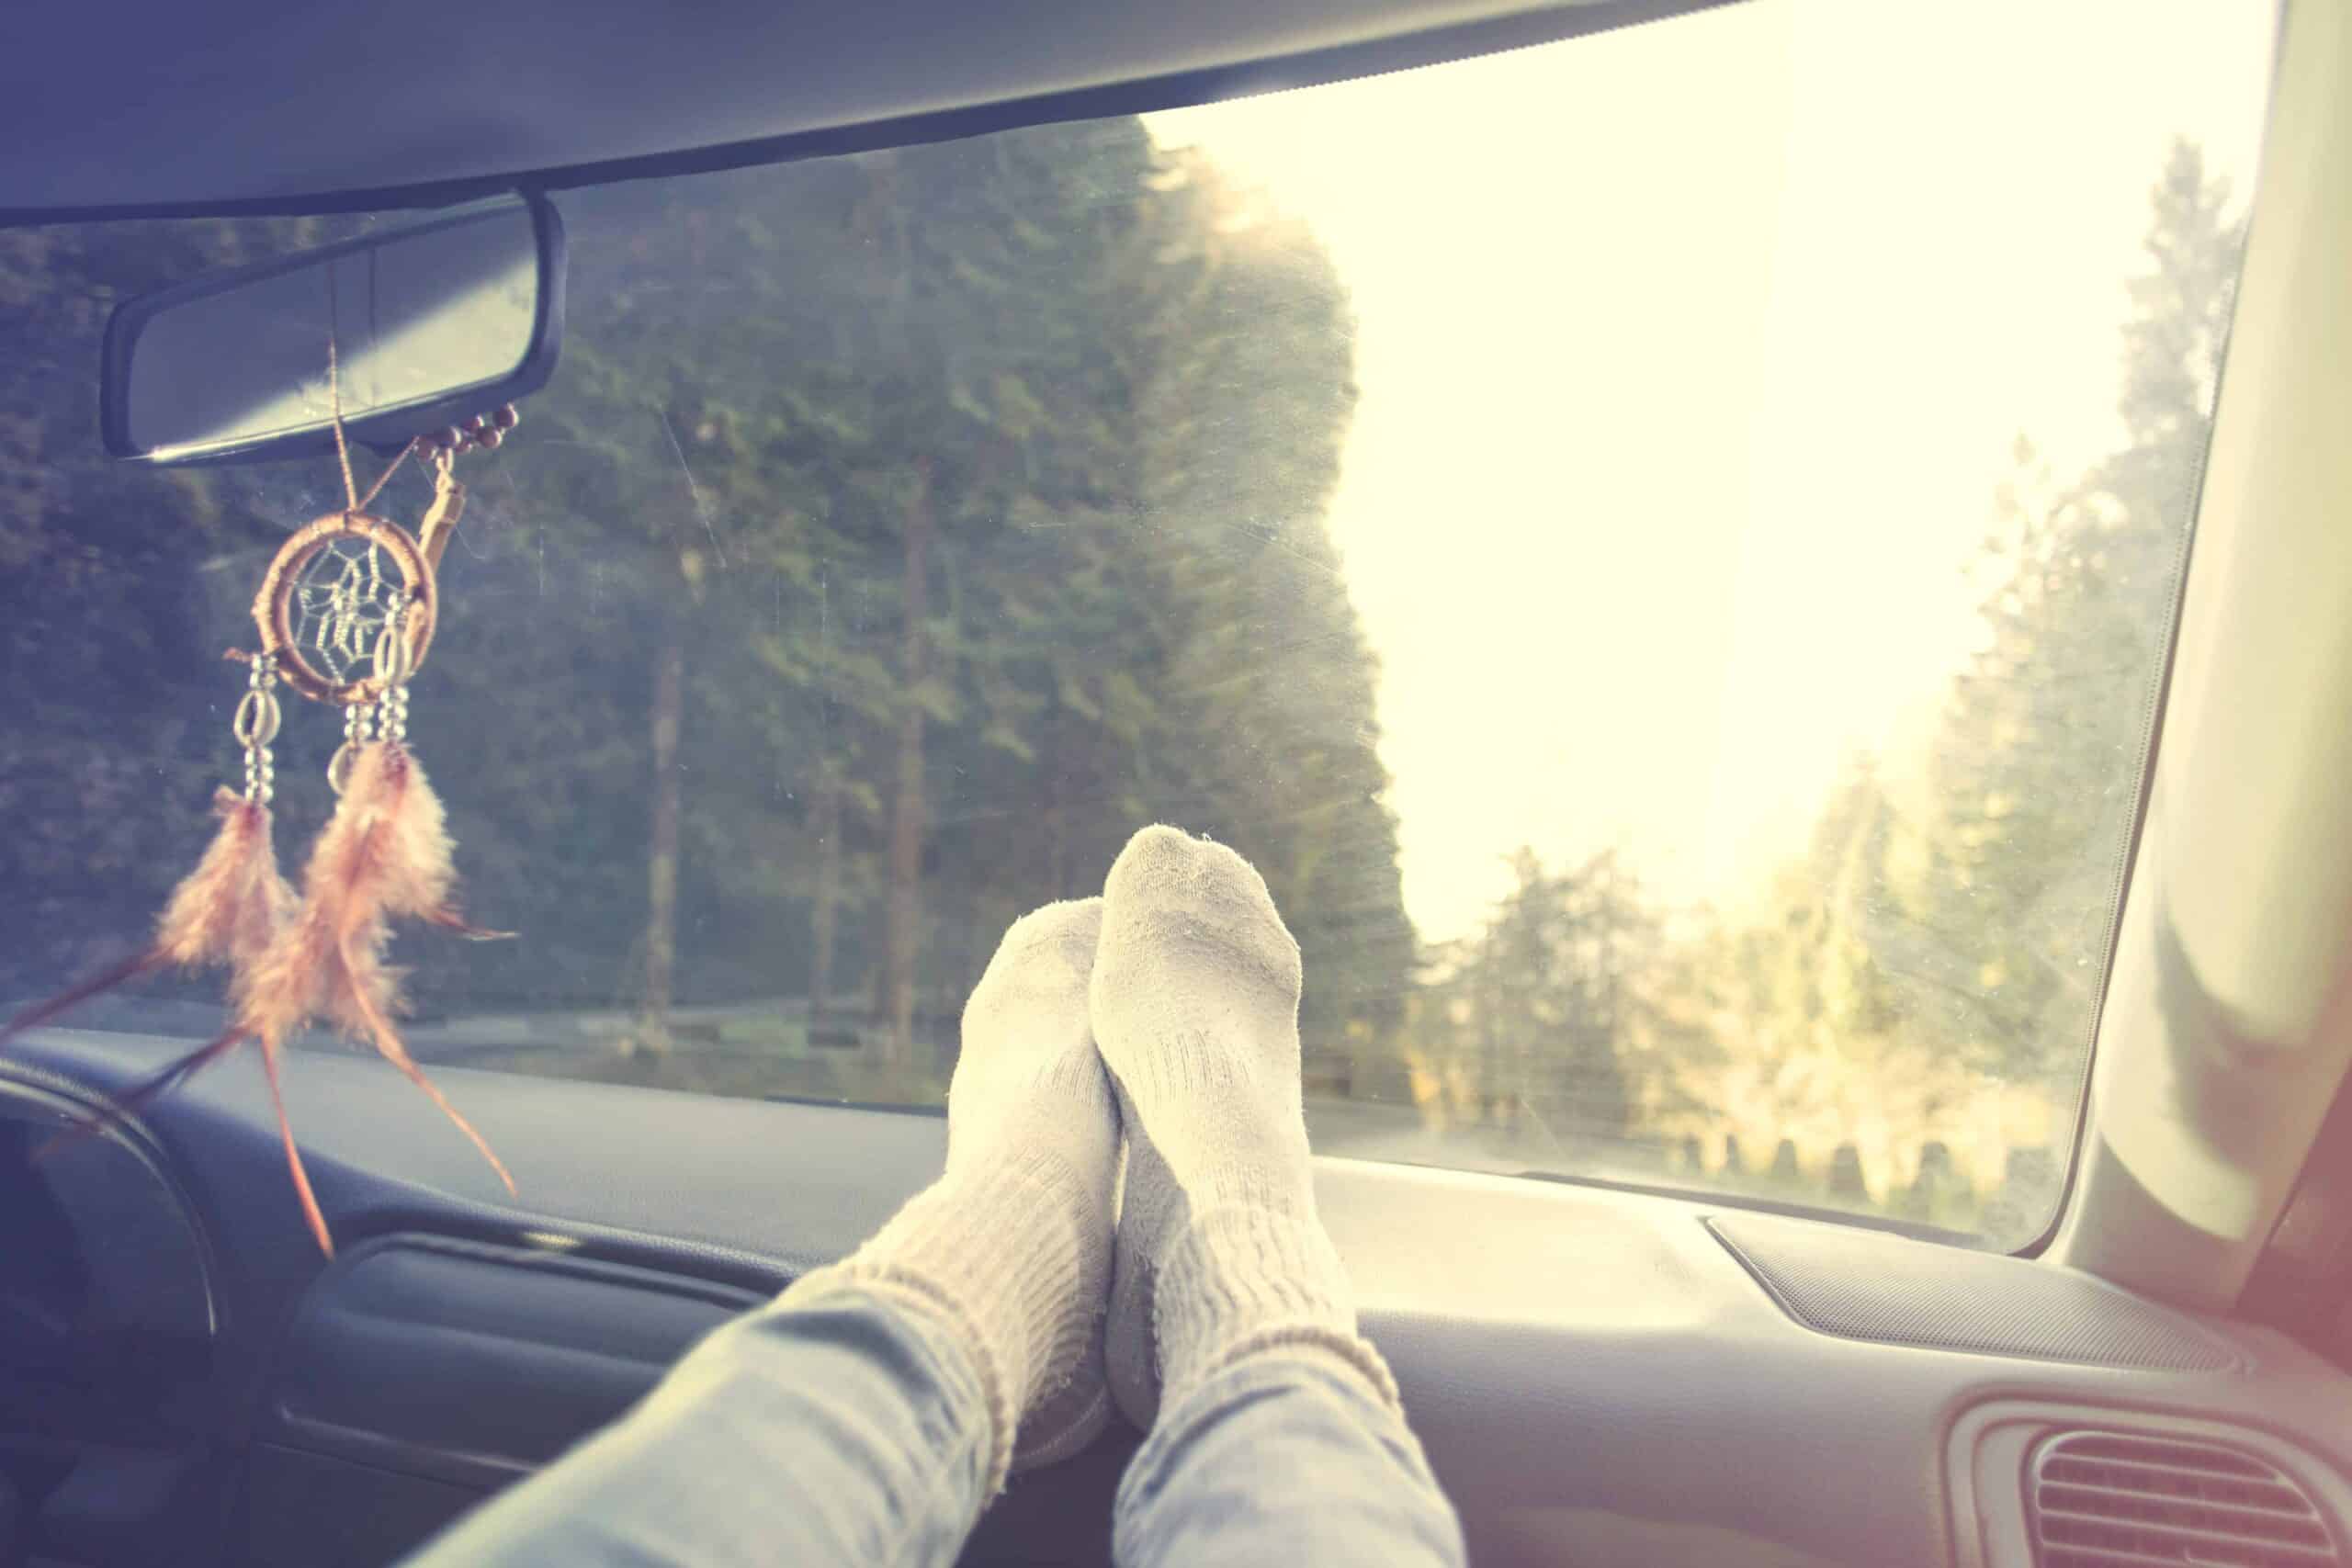 Relaxed person with feet on dashboard during car trip